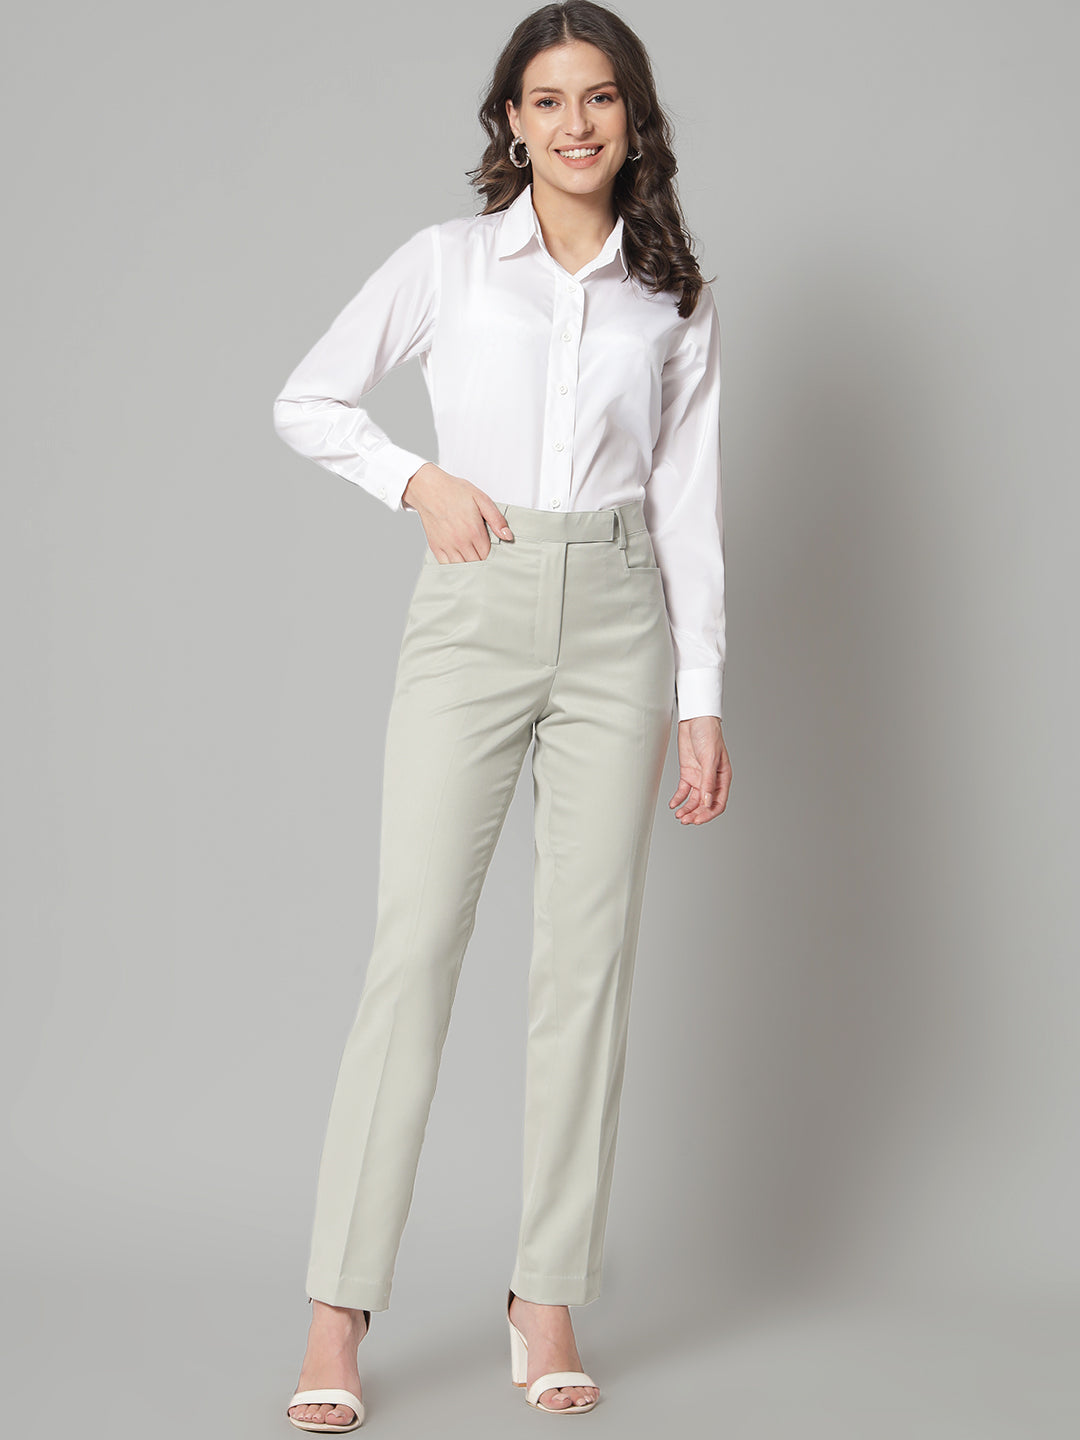 Buy Stylish Ash Grey Formal Trousers Online in India